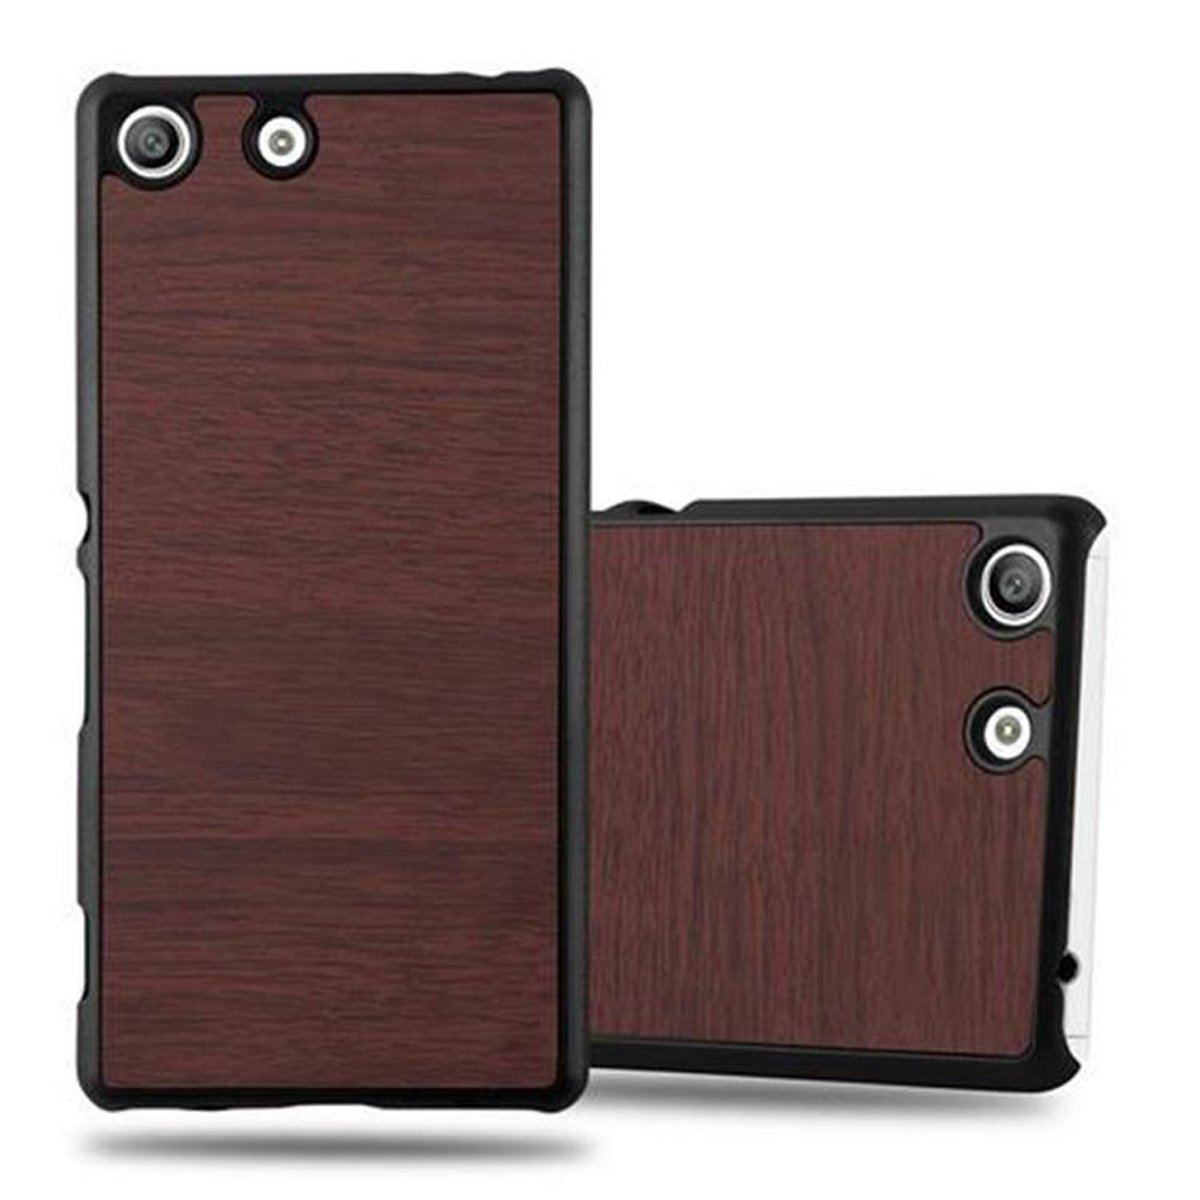 Sony, Backcover, Hard Case CADORABO KAFFEE Hülle Woody Xperia M5, WOODY Style,